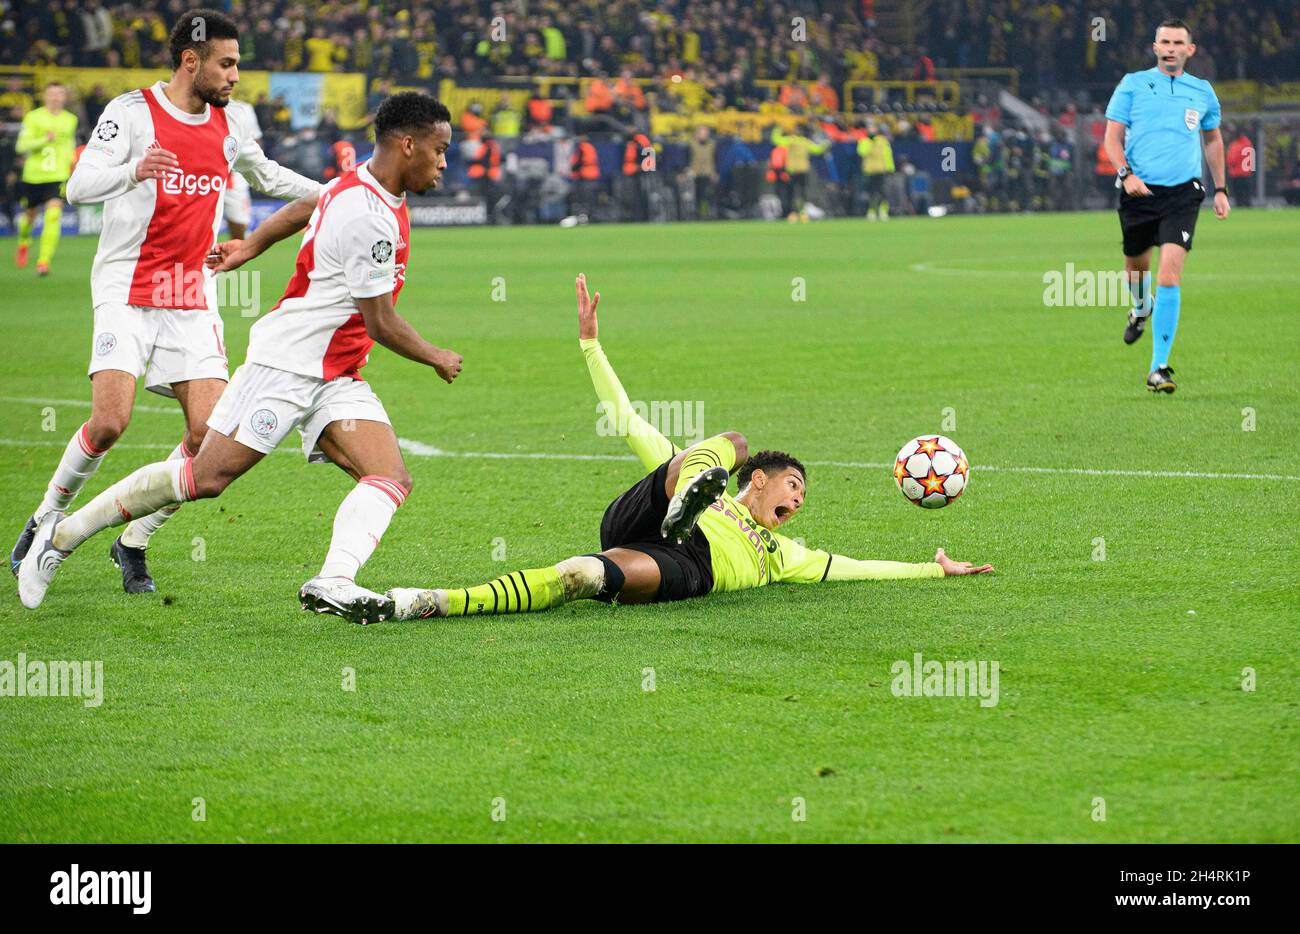 Dortmund, Deutschland. 03rd Nov, 2021. Noussair MAZRAOUI l. (Ajax) fouls Jude BELLINGHAM r. (DO) in the penalty area after VAR gives it penalty, action, duels, Jurrien TIMBER (Ajax) Soccer Champions League, preliminary round 4th matchday, Borussia Dortmund (DO) - Ajax Amsterdam, on 03.11.2021 in Dortmund/Germany. Â Credit: dpa/Alamy Live News Stock Photo